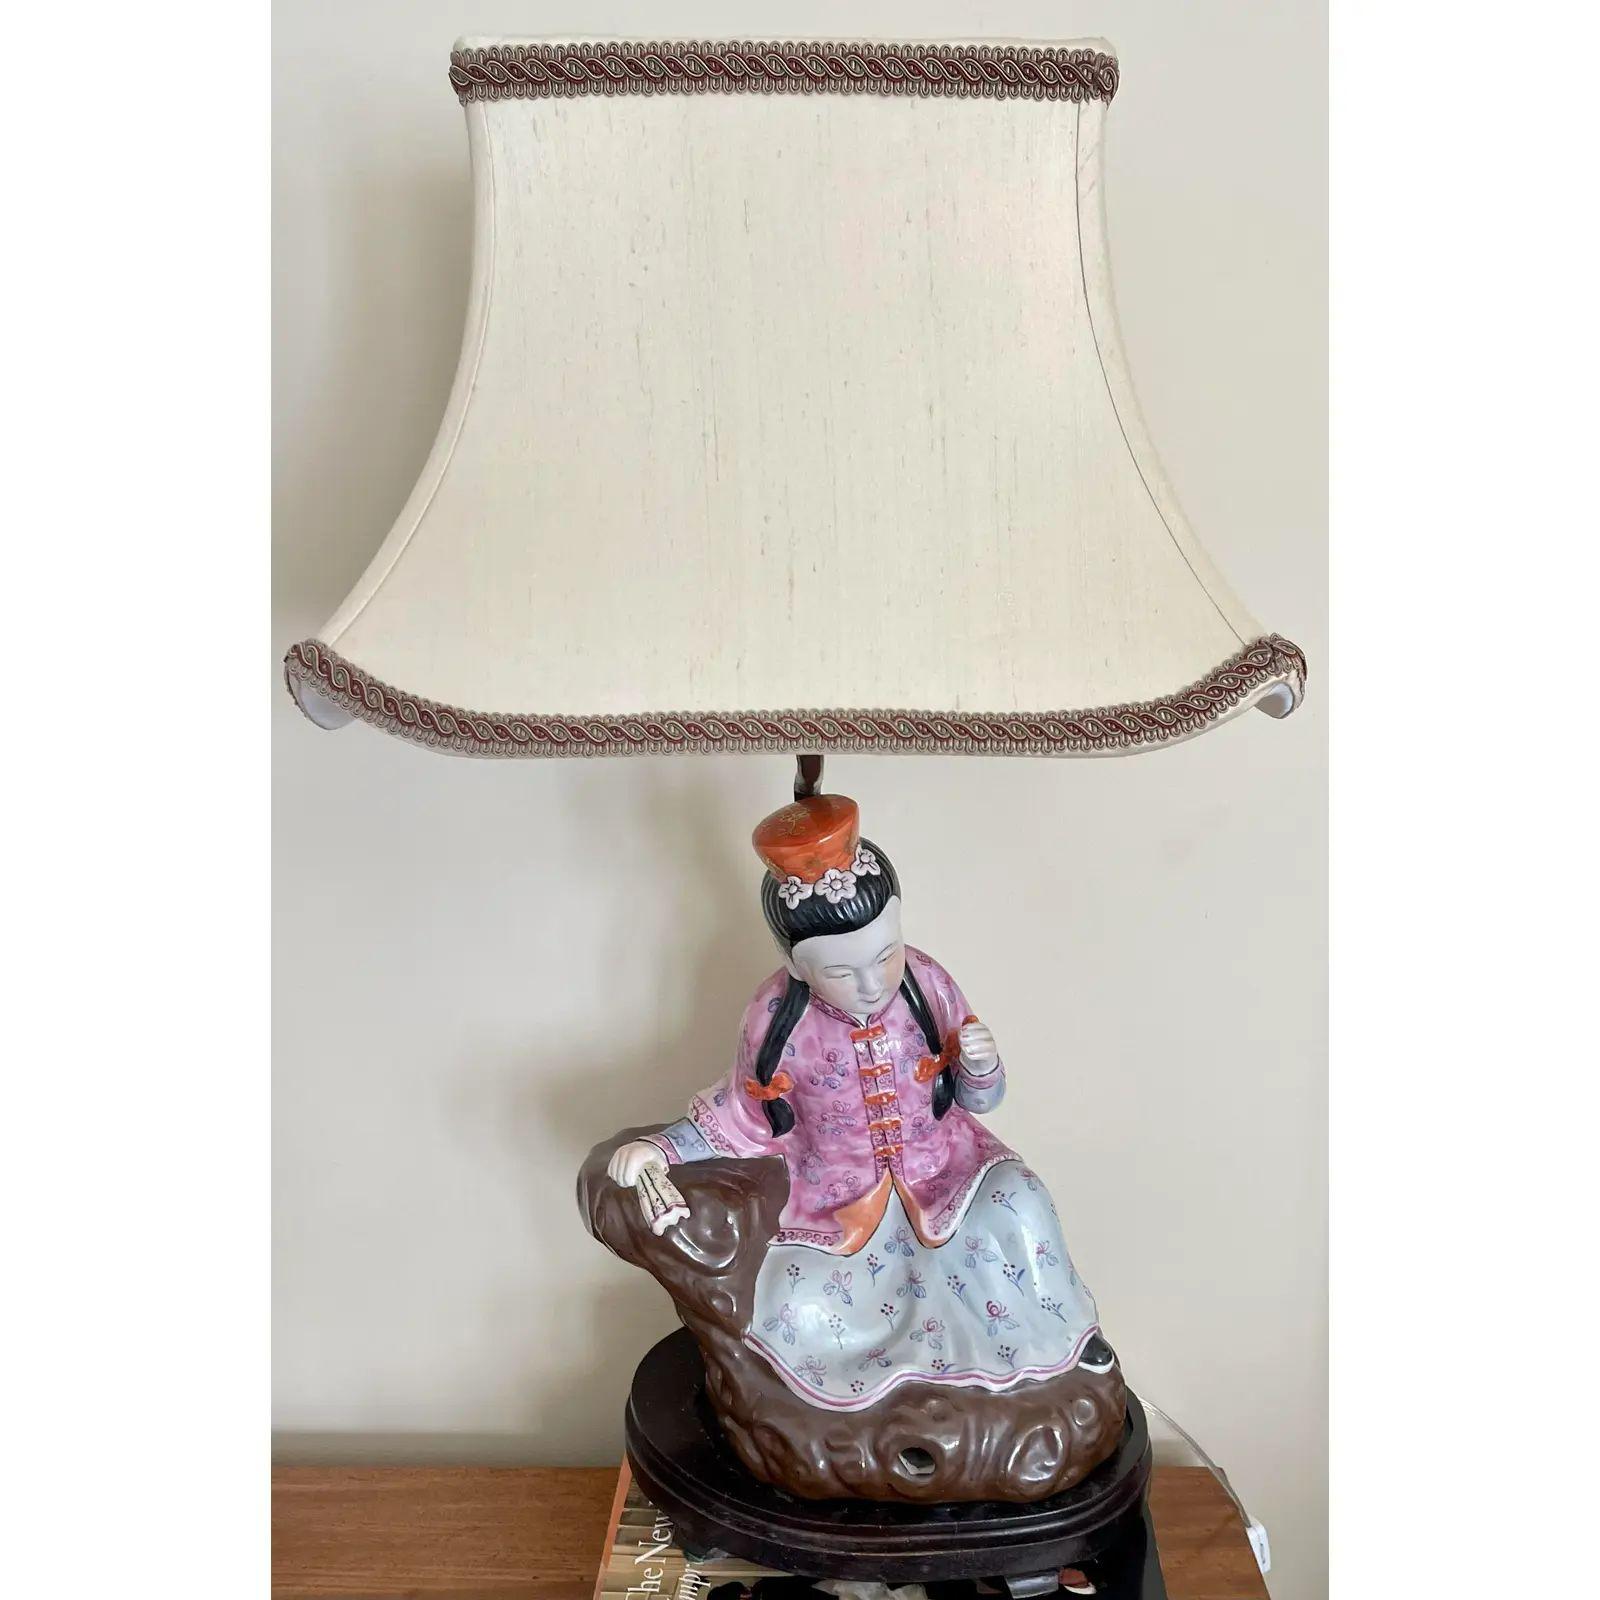 Antique Chinese Ching Dynasty seated famille rose figurines now designer table lamps. These lovely figures set freely on the lamp stands and have not been drilled. They depict a man and a woman seated in lovely famile rose Chinese pottery. They are